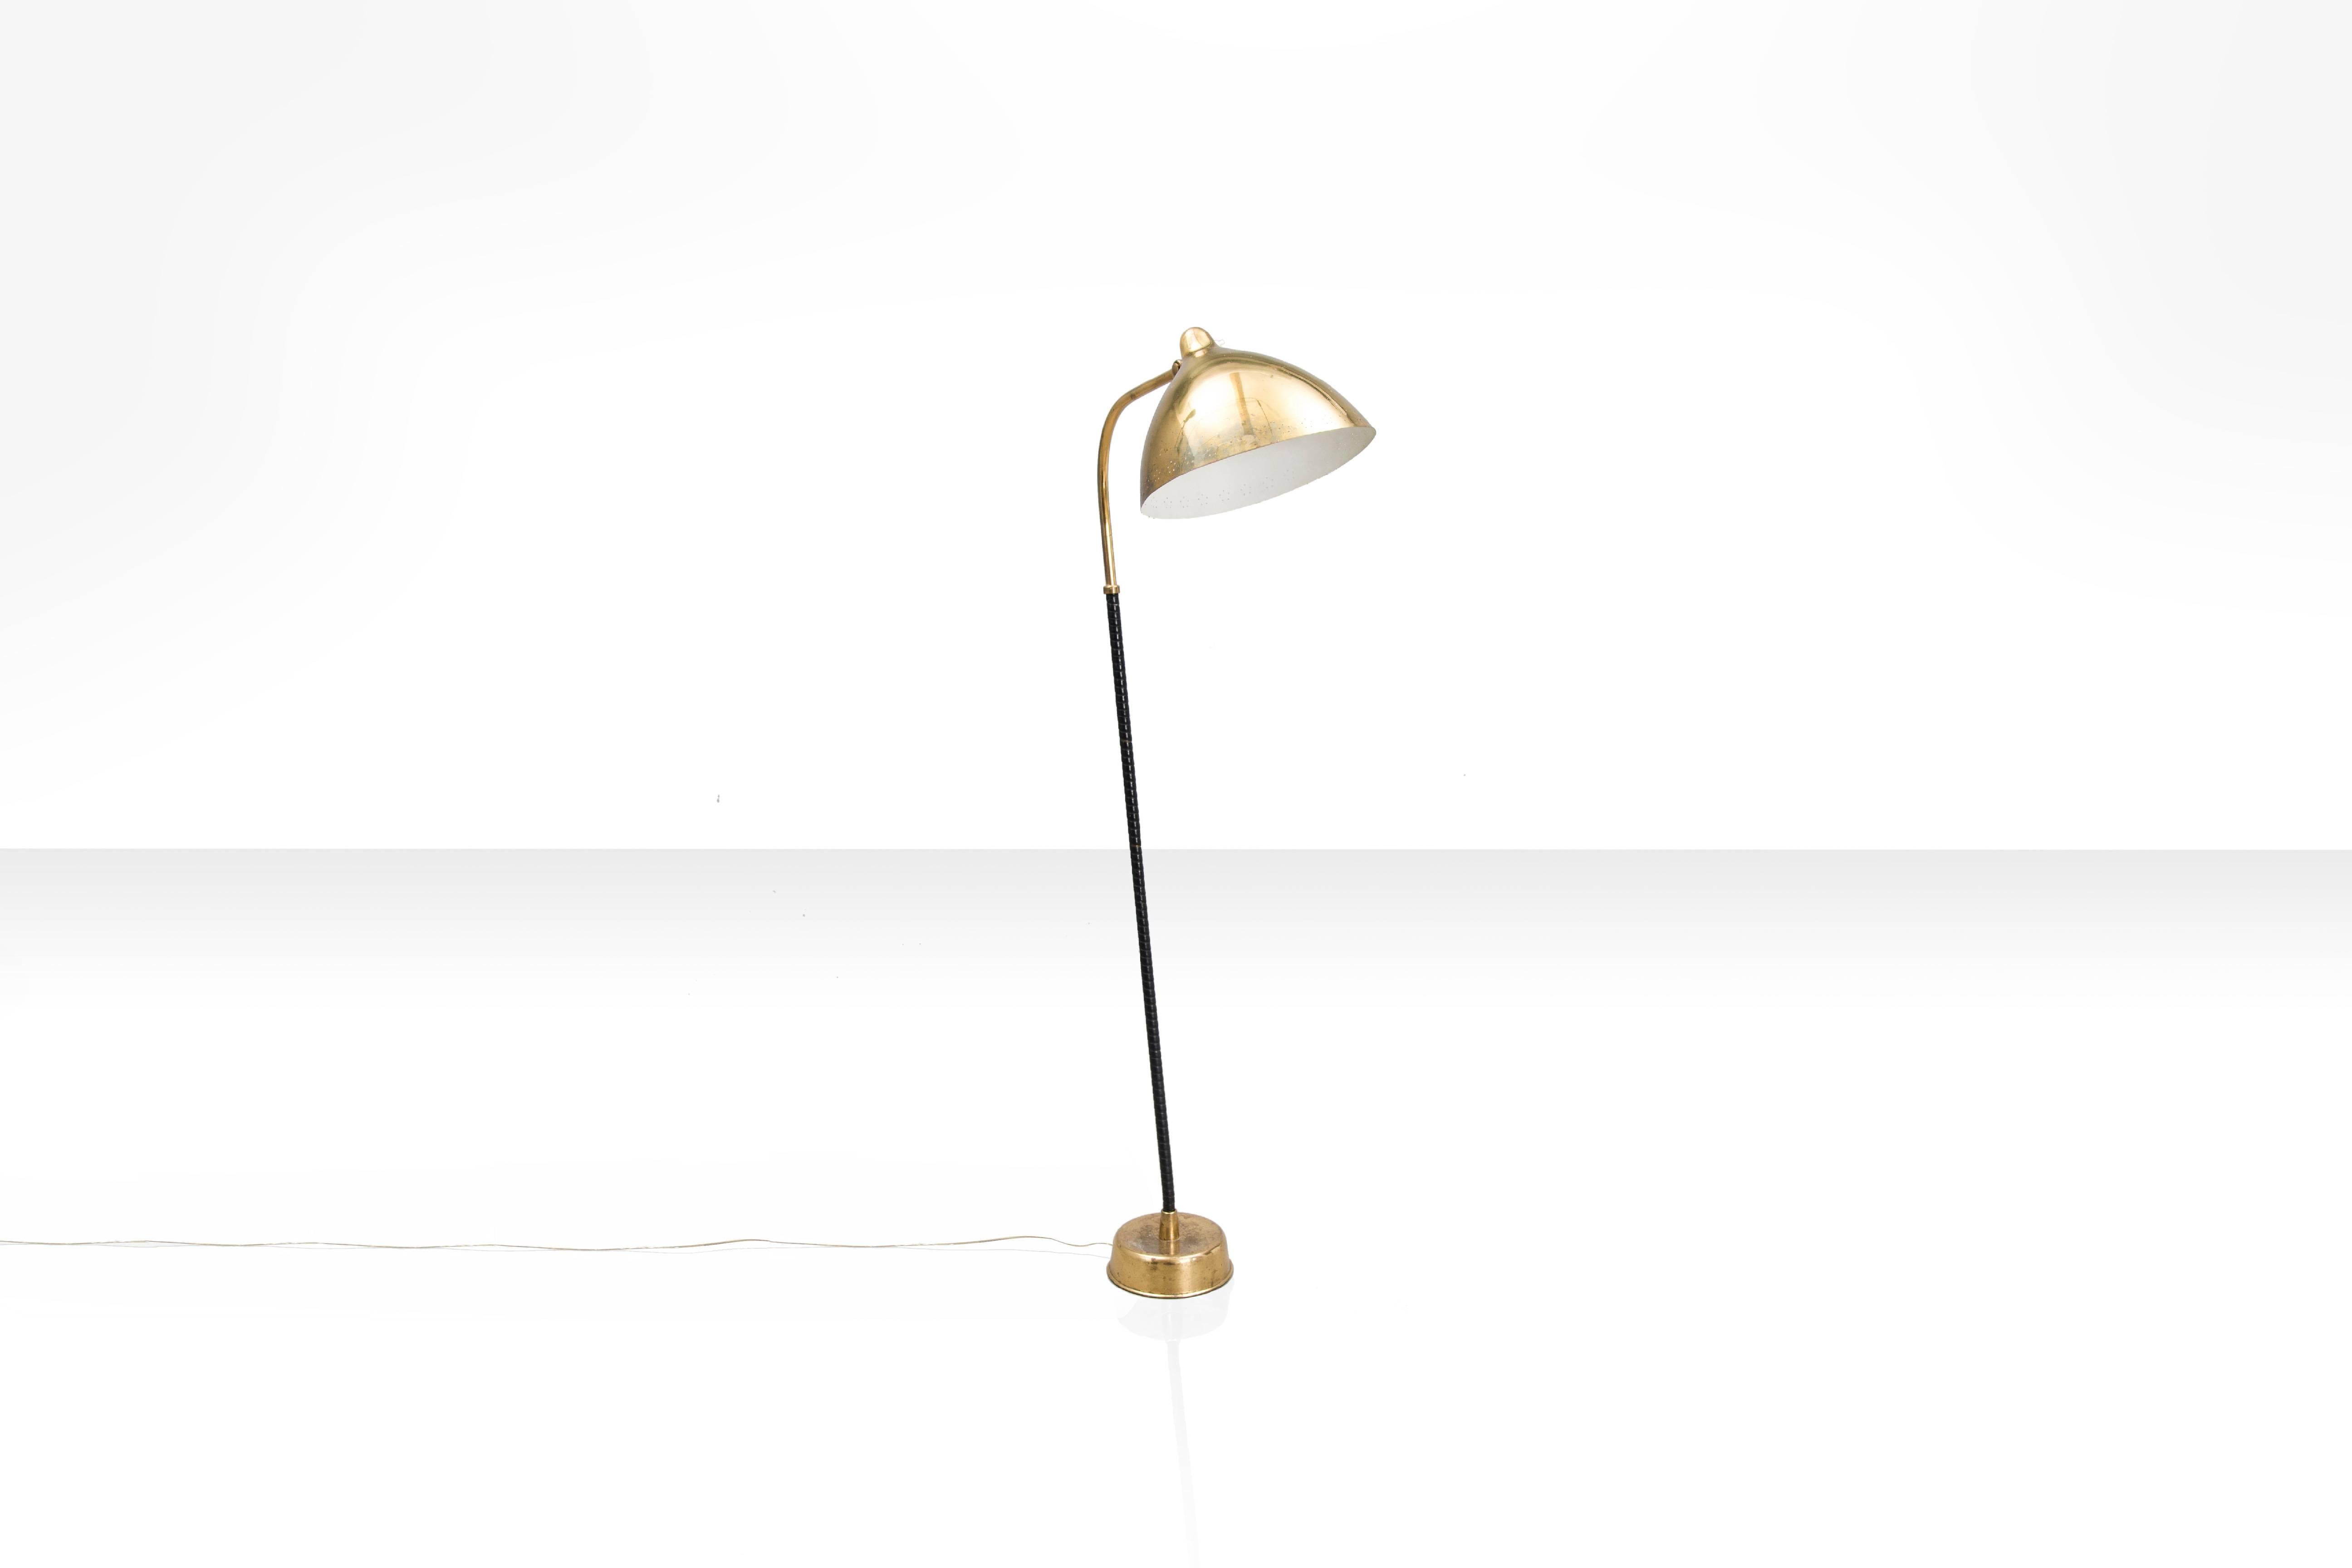 This elegant floor lamp by Lisa Johansson-Pape has a perforated brass shade that is supported by a thin slanted pole wrapped with black leather. This elegant lamp is as beautiful in real life as on the pictures and a timeless classic.

Signed with